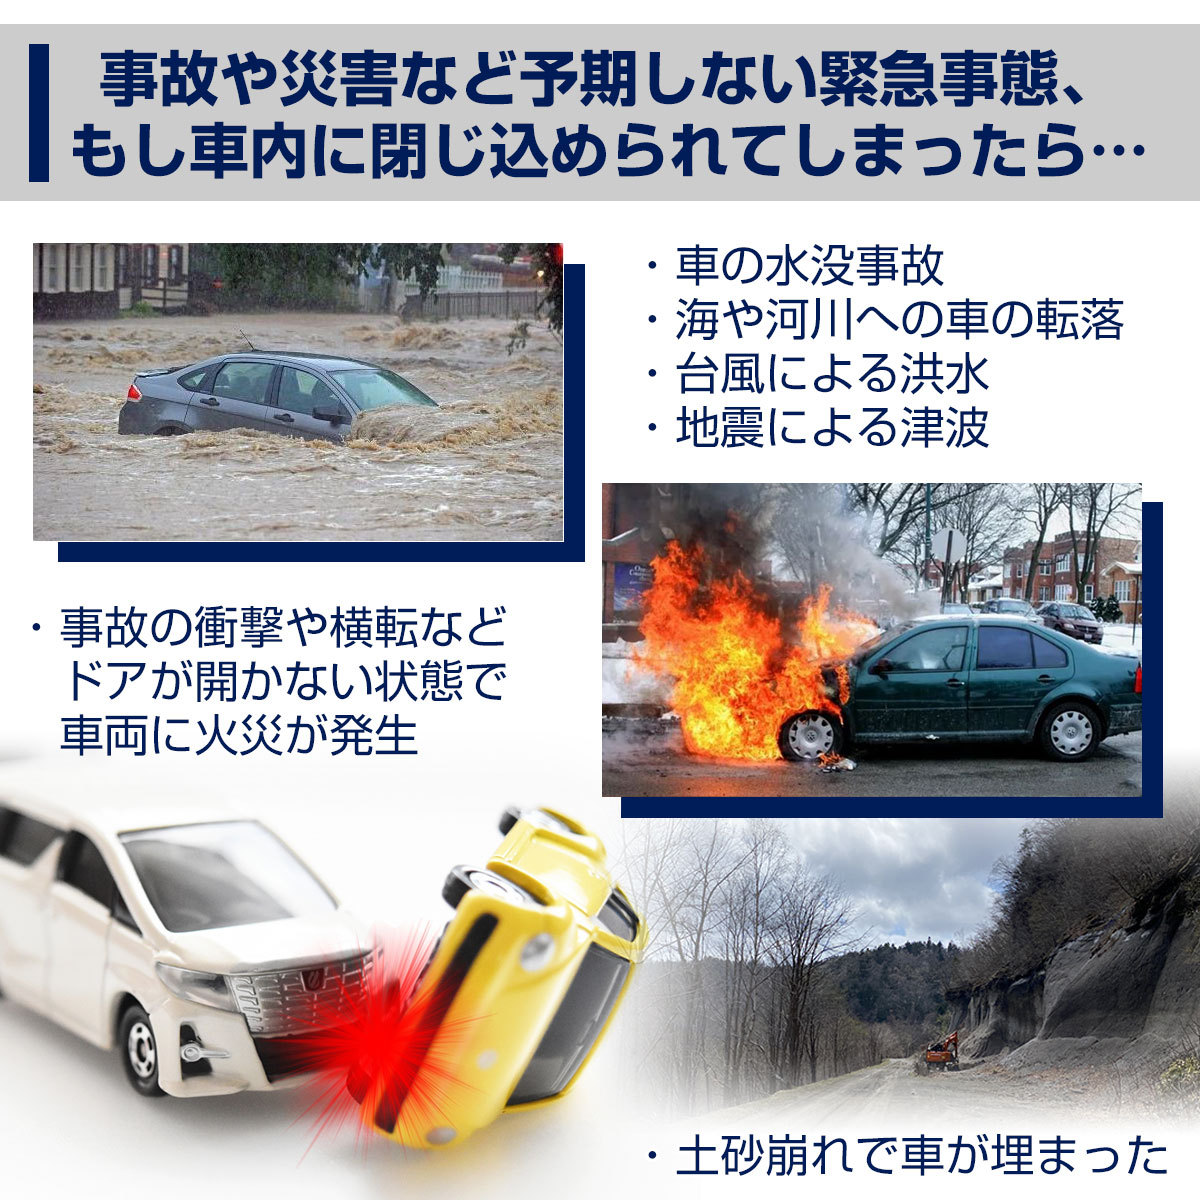  disaster prevention set goods car in-vehicle Hammer .. Rescue disaster water .. water submerge accident large rain Rescue card urgent seat belt cutter for emergency window glass break up .